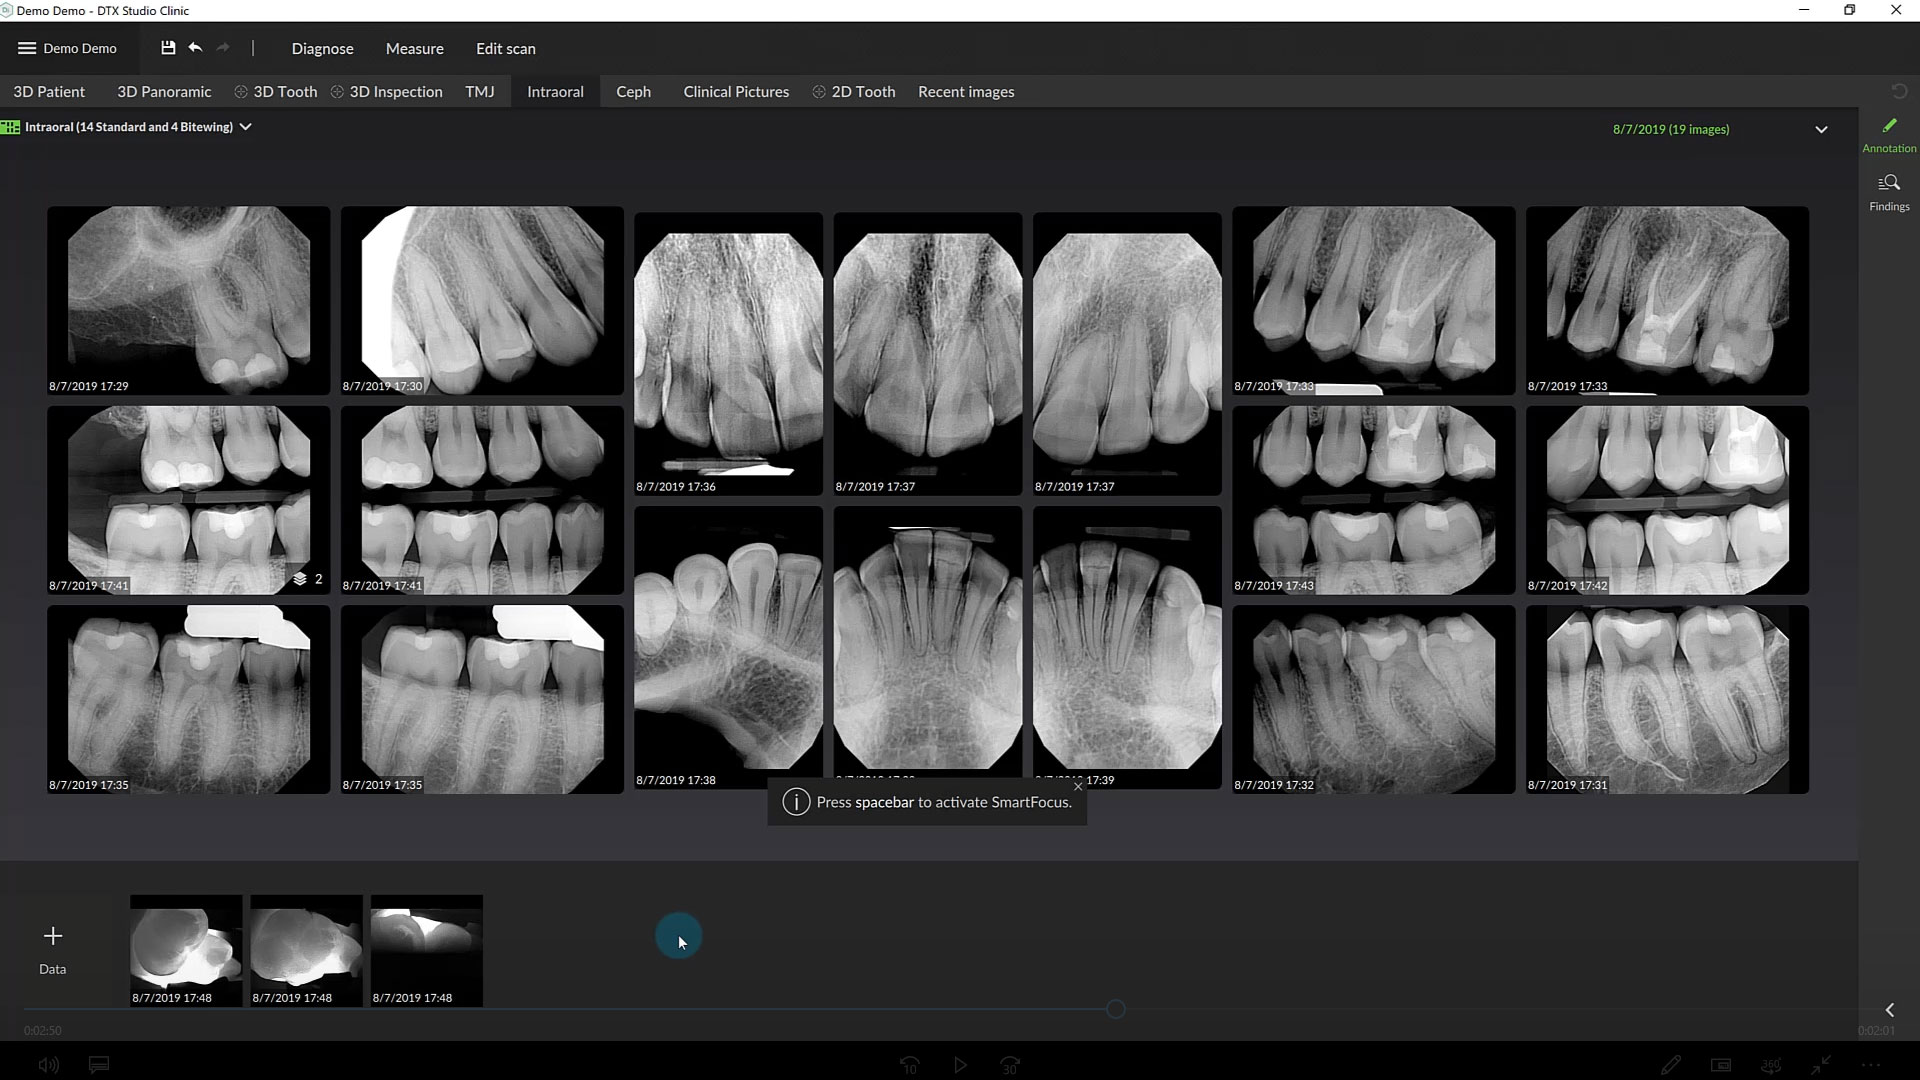 Intraoral Workspace, Full Mouth Series